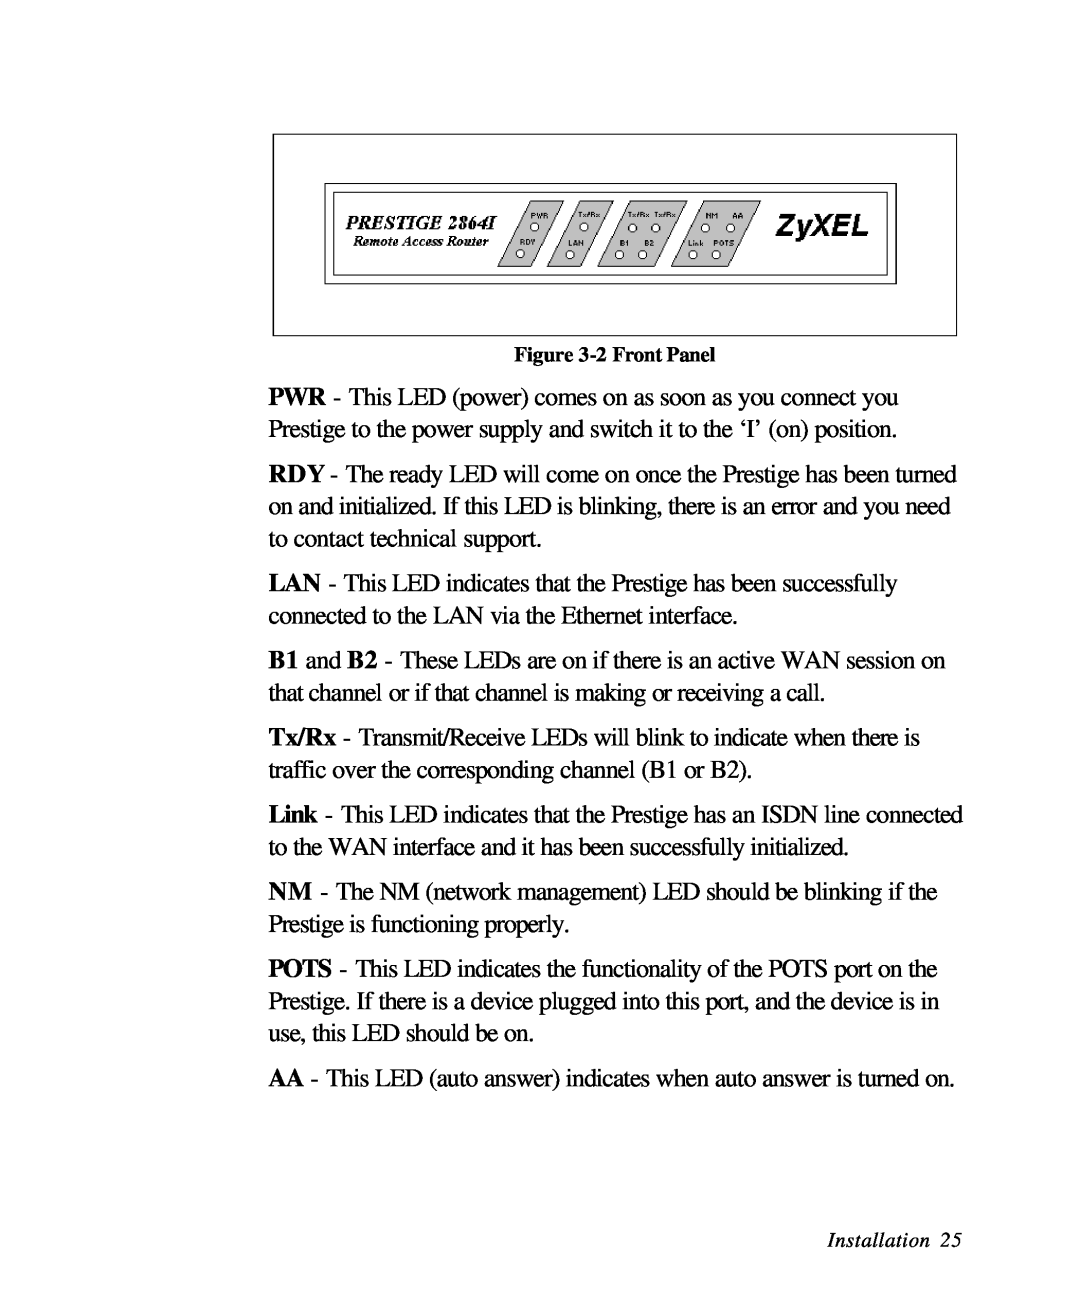 ZyXEL Communications 28641 user manual AA - This LED auto answer indicates when auto answer is turned on 